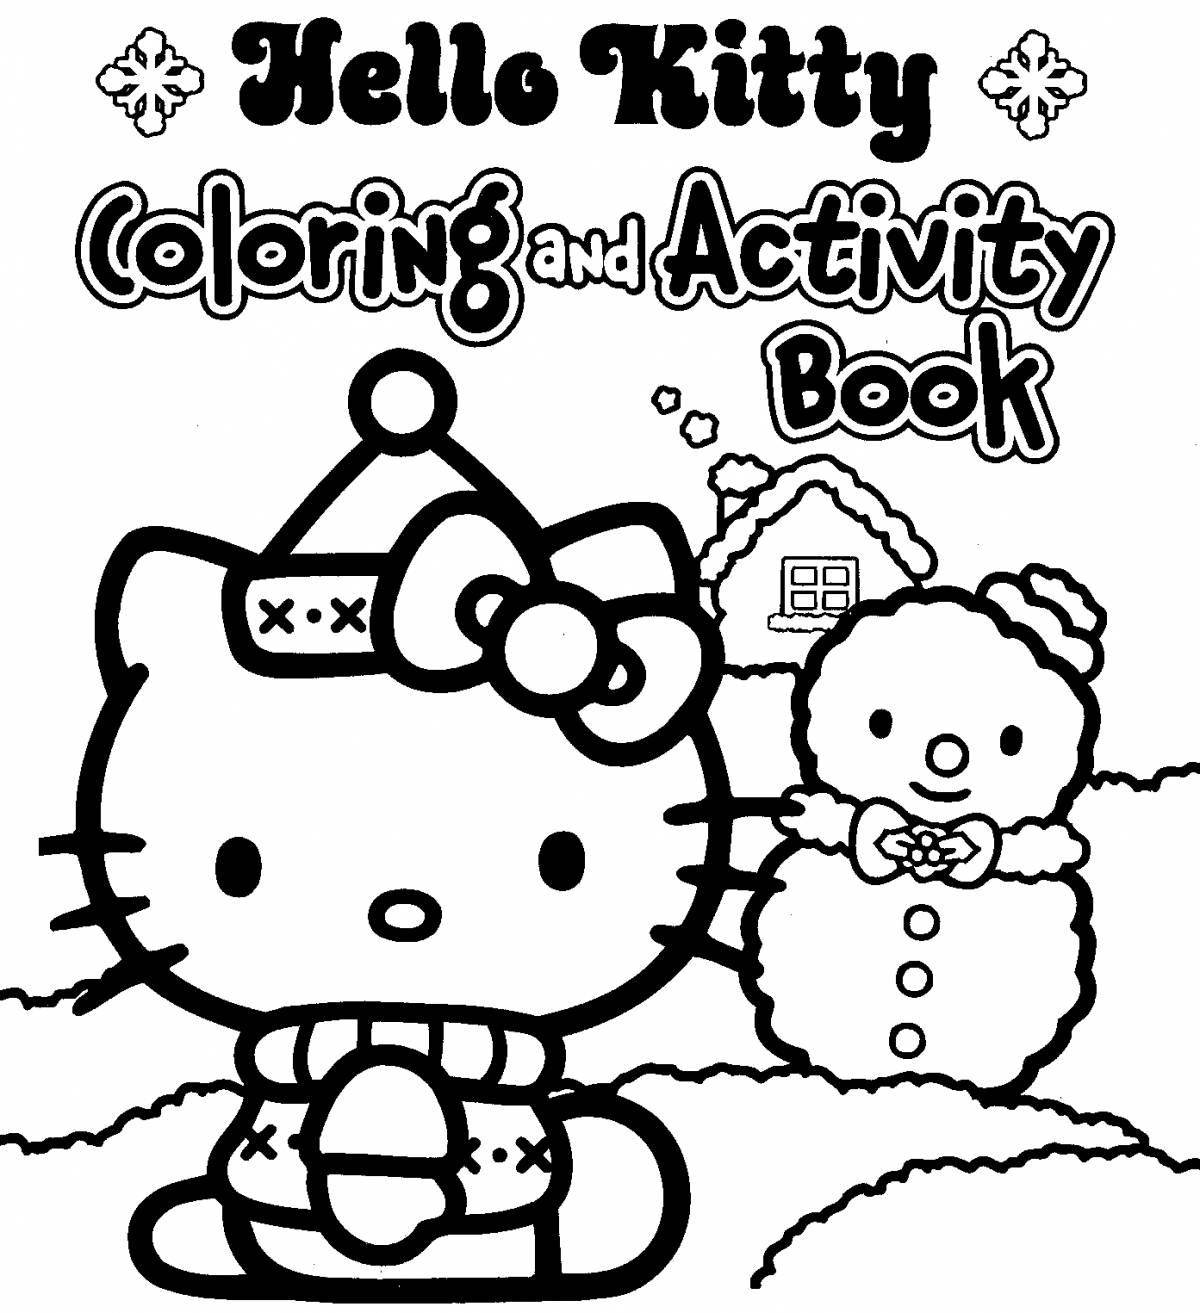 Glowing hello kitty poster